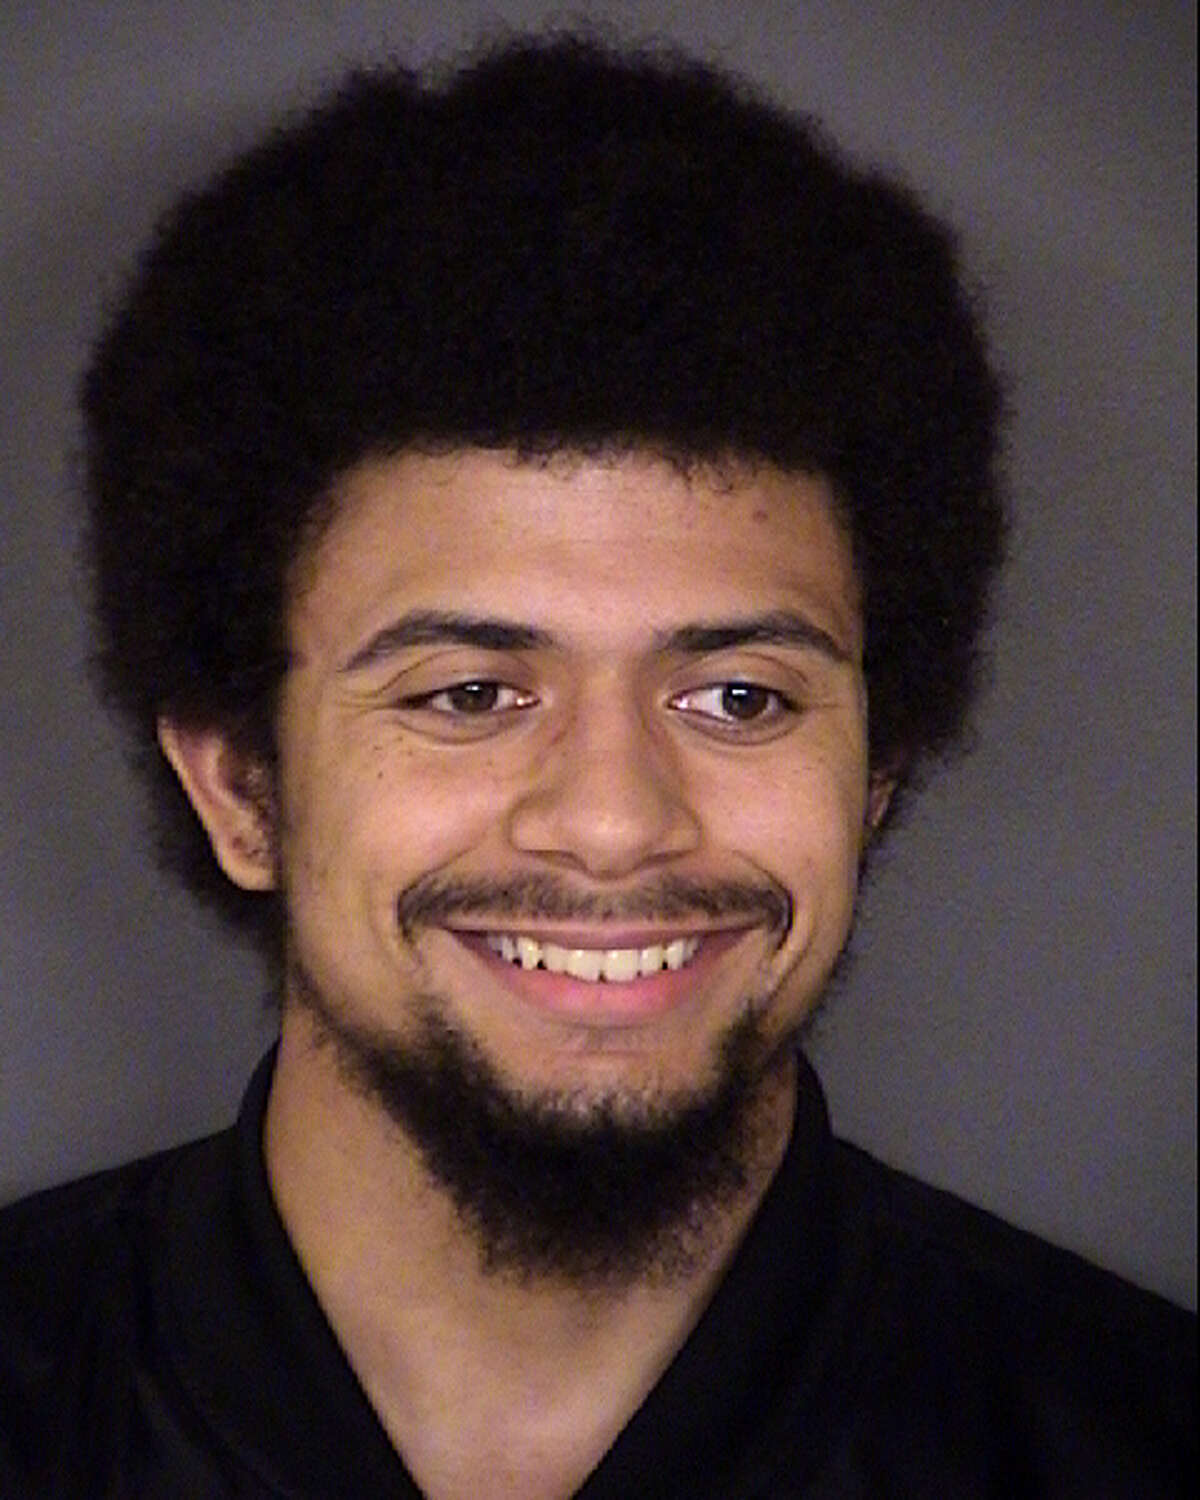 Alexander William Hyde, 19, seen in a booking photo from 2017, was found dead in a home where a murder-suicide was reported Tuesday, Nov. 6, 2018 in the 10300 block of Cone Hill Drive. San Antonio Police said he went to the home unannounced and shot three women, killing two. The Bexar County Medical Examiner's office ruled his death a suicide.